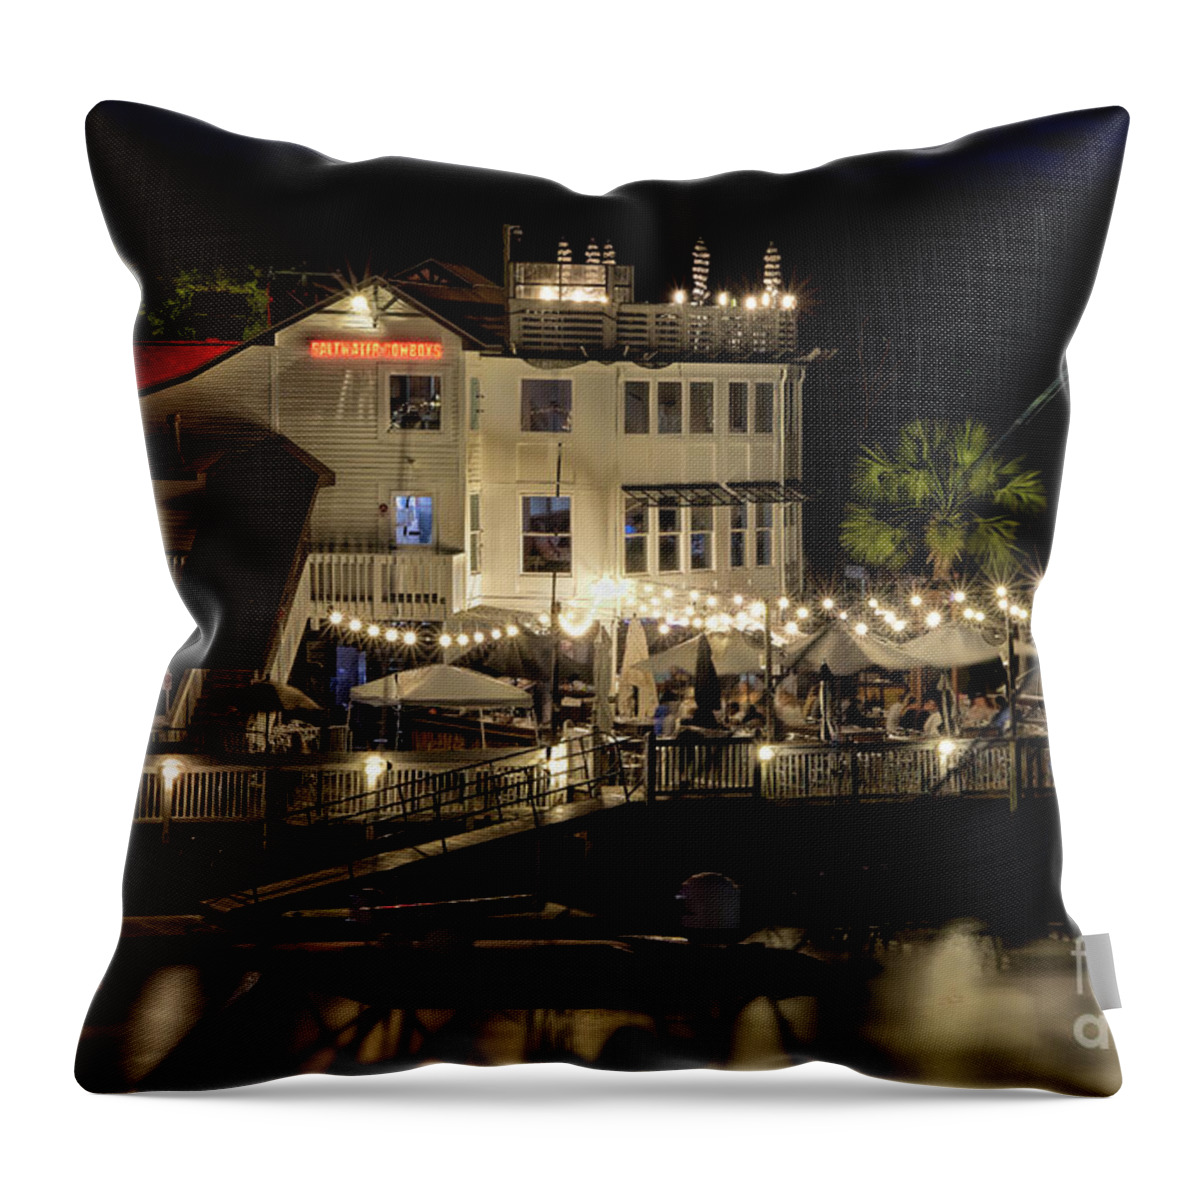 Saltwater Cowboys Throw Pillow featuring the photograph Saltwater Cowboys at Shem Creek by Shelia Hunt